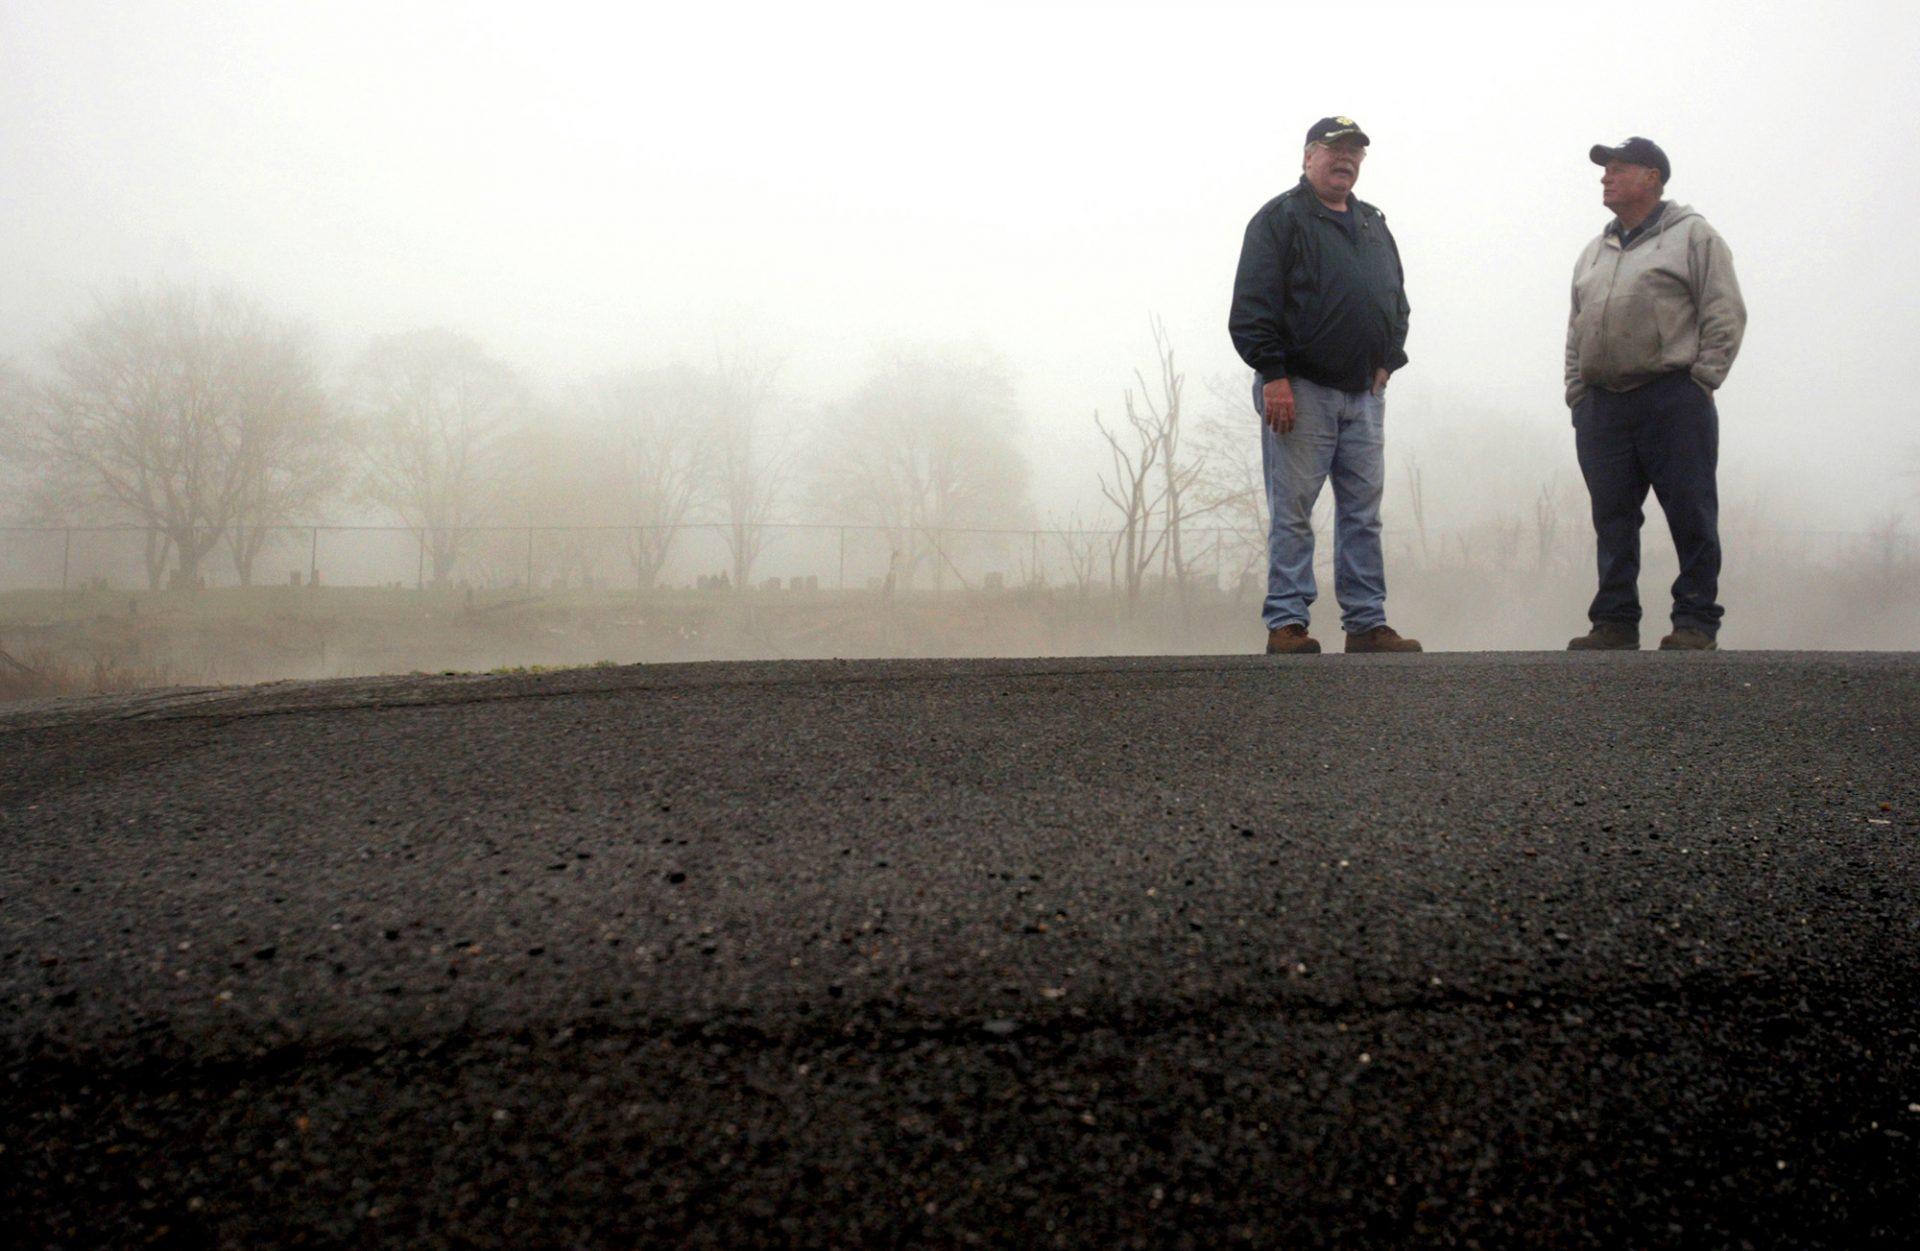 Tom Dempsey and George Fogel witnessed the start of the Centralia mine fire when they were teenagers in 1962 and tried unsuccessfully to help put it out, May 29, 2005.